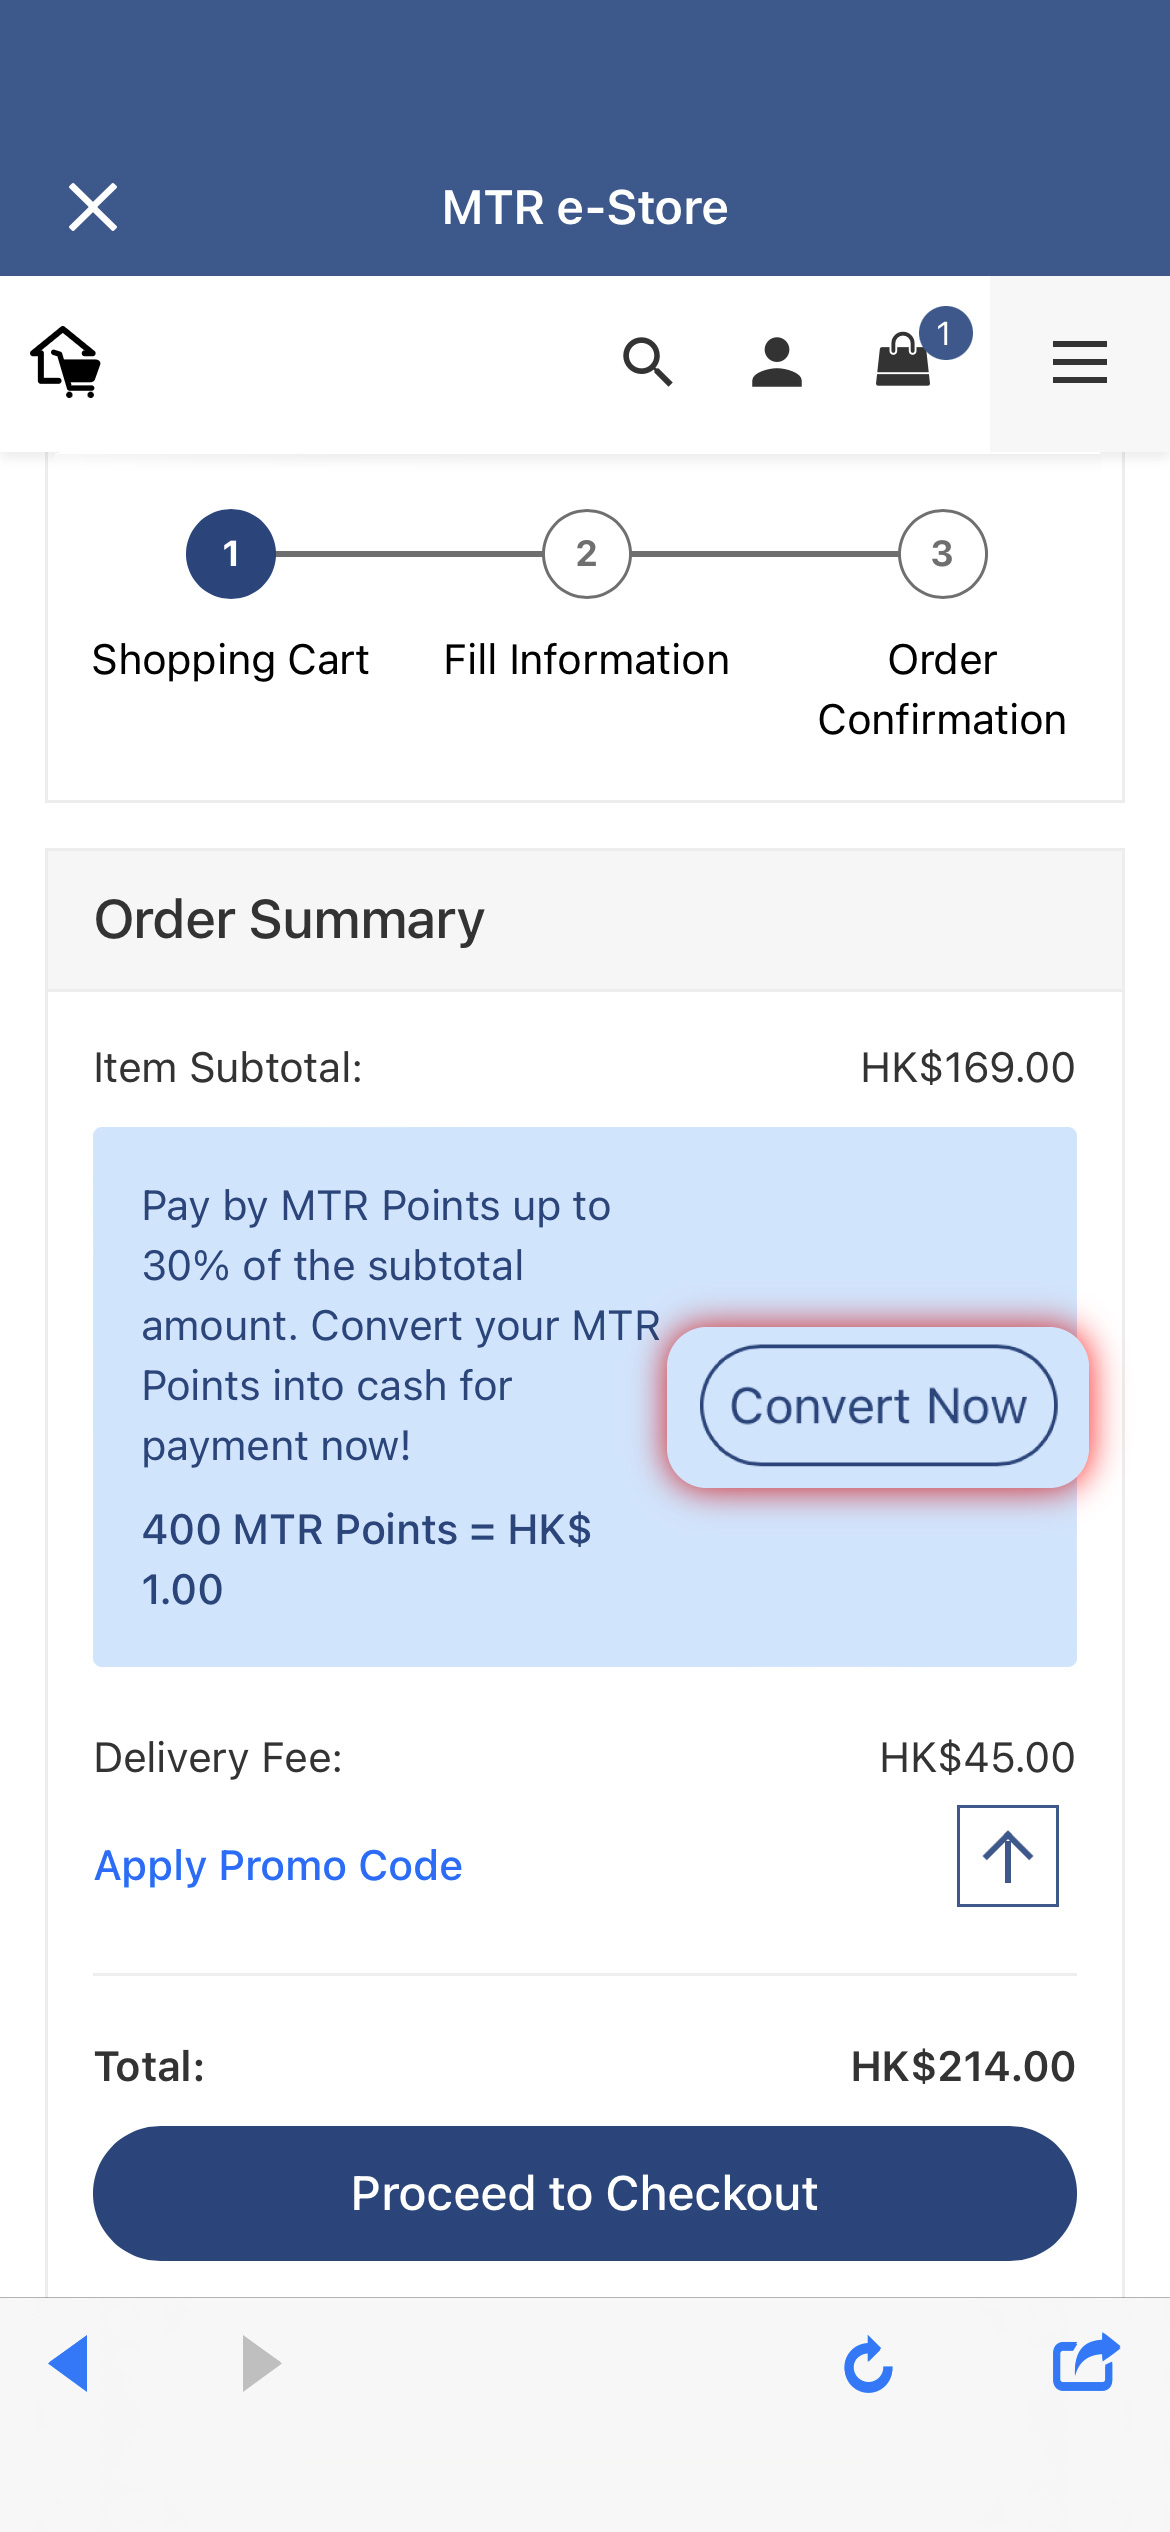 Click 'Convert Now' under Order Summary in Shopping Cart page